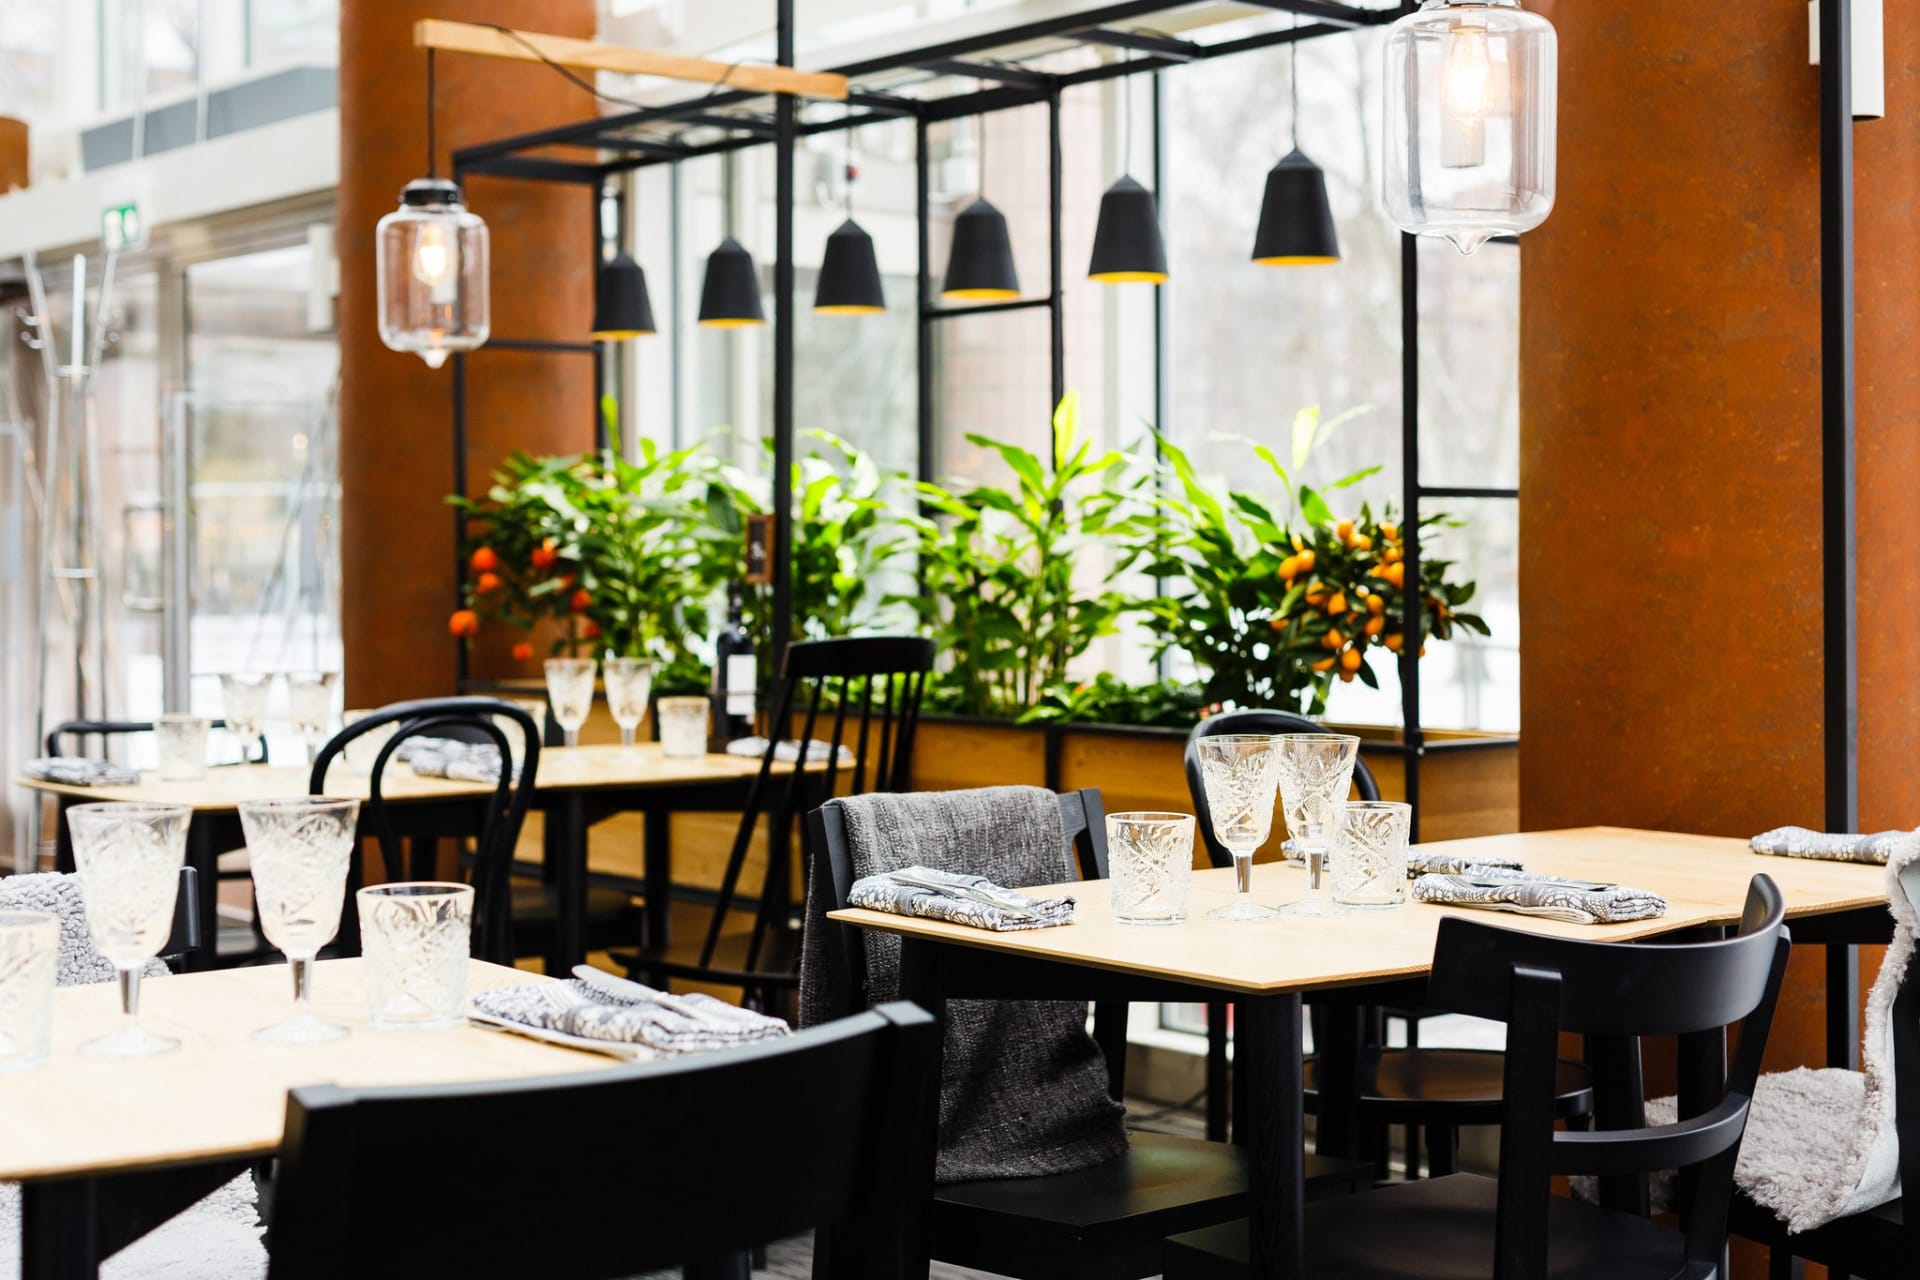 Restaurant Tuhto´s cozy interior with warm wooden tones and green plants